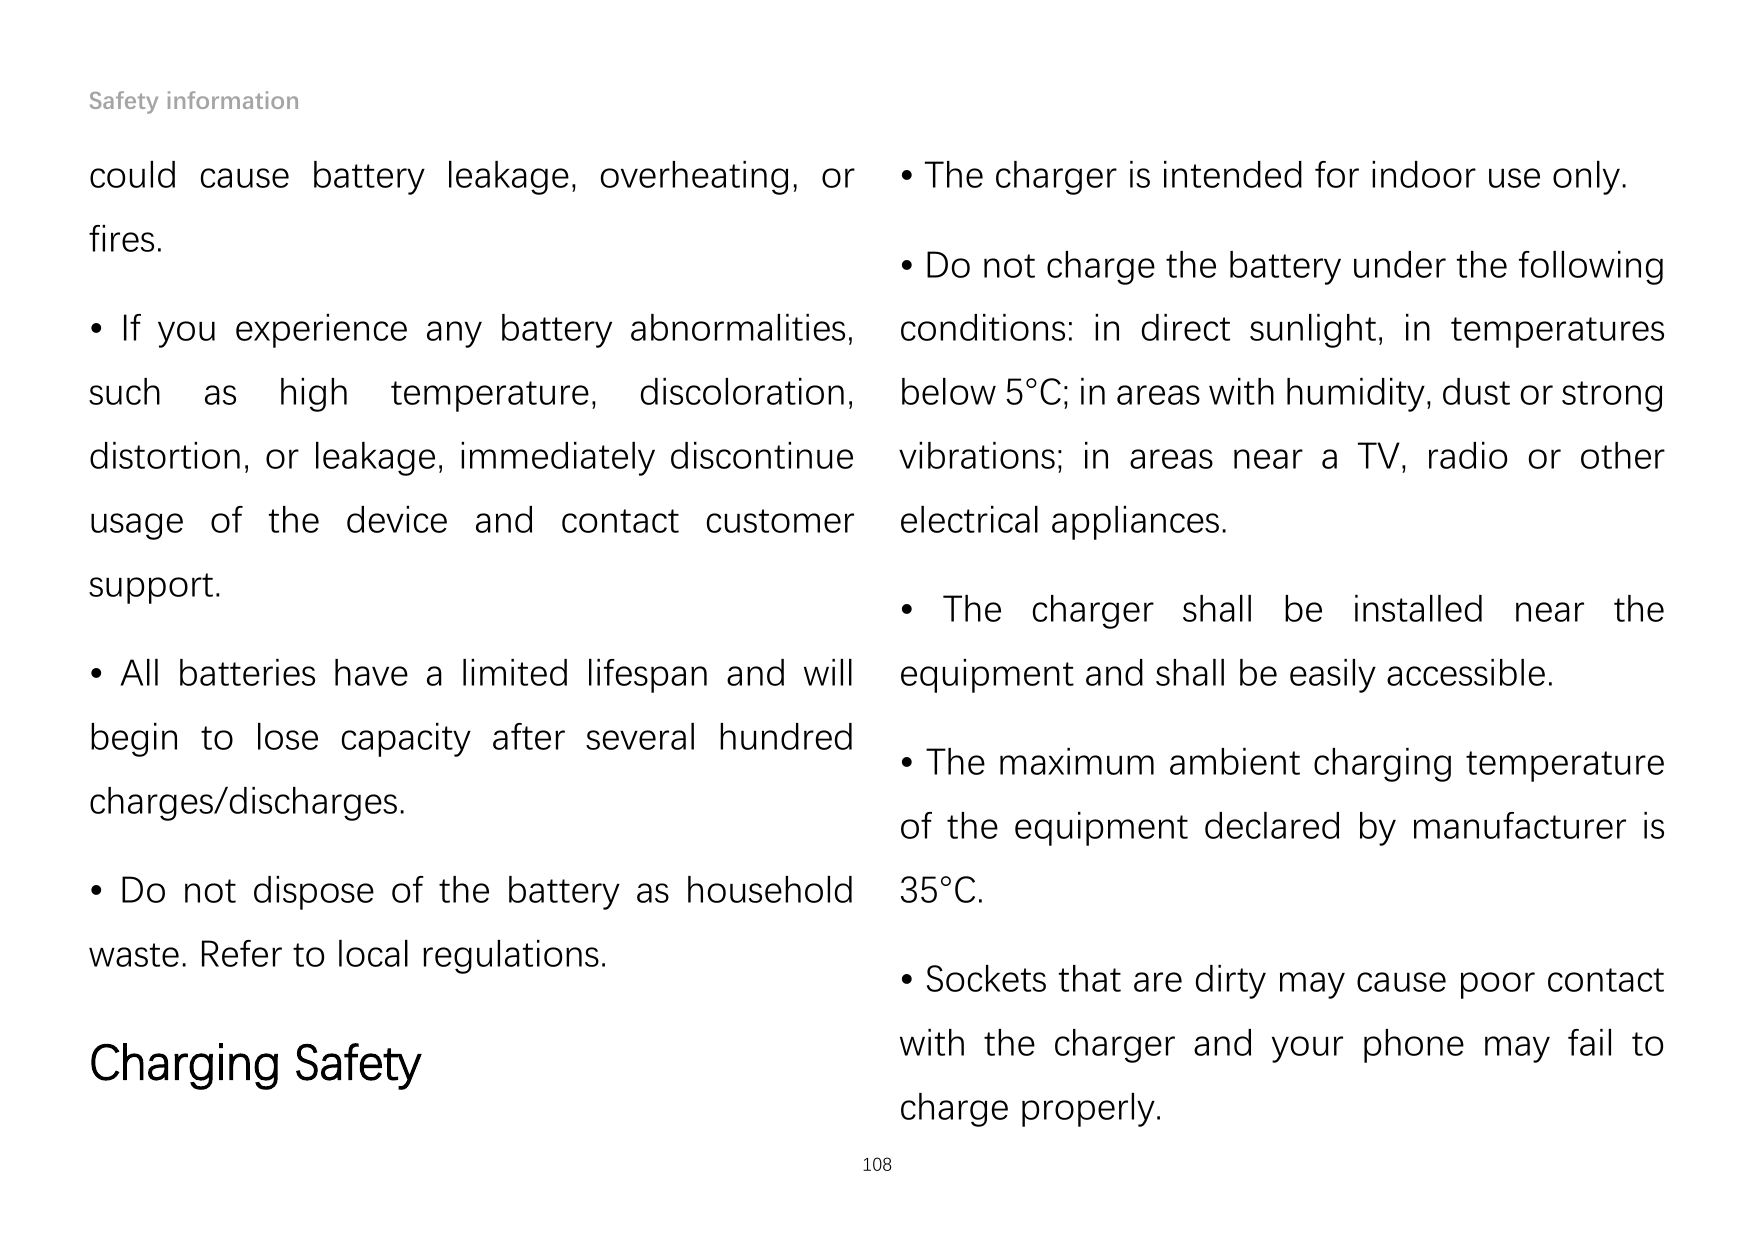 Safety informationcould cause battery leakage, overheating, or• The charger is intended for indoor use only.fires.• Do not charg